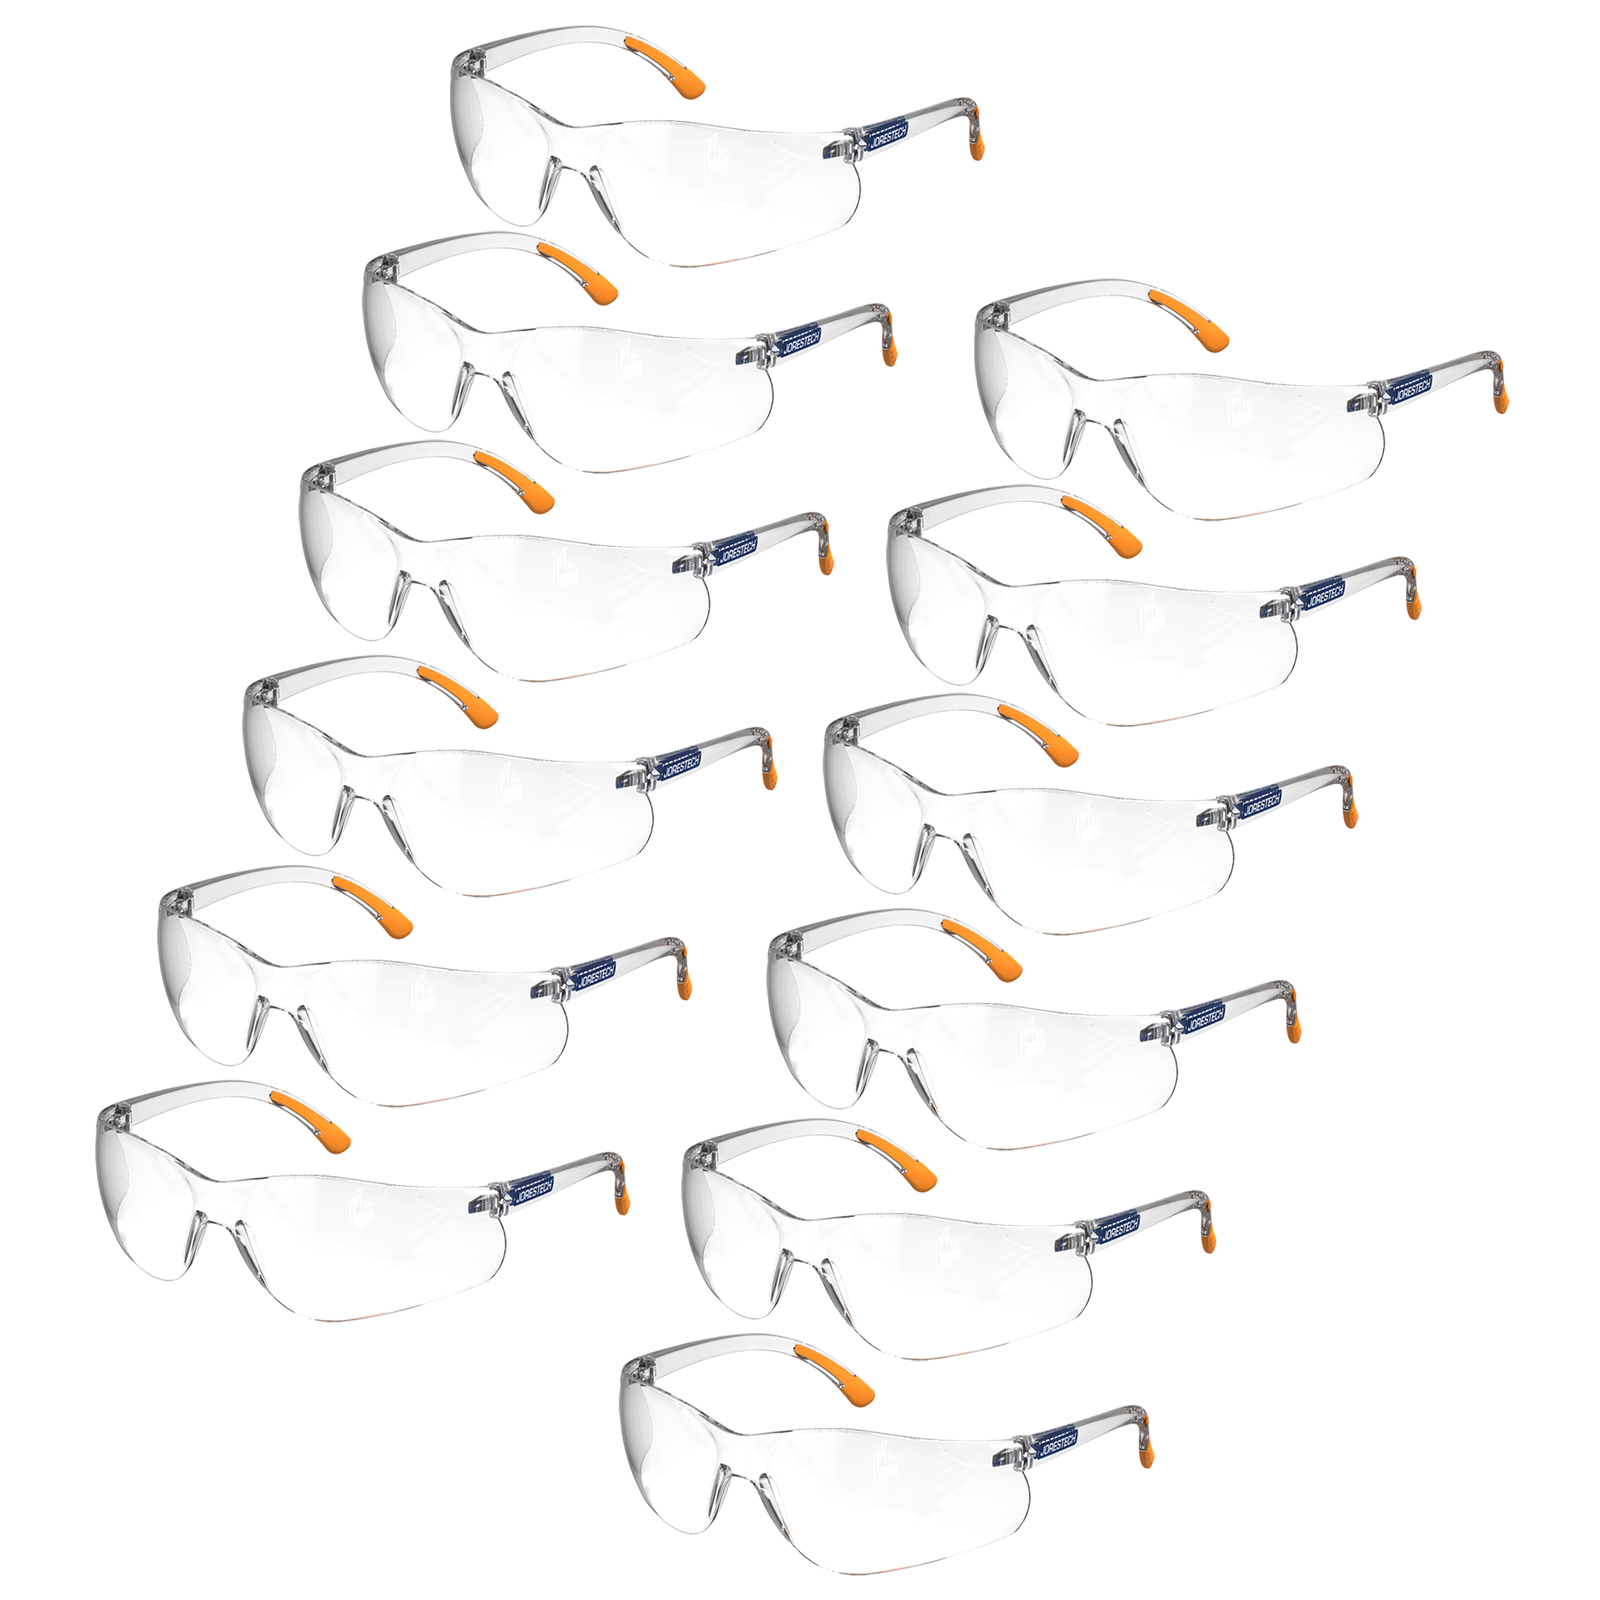 Pack of 12 wraparound safety glasses for high impact protection